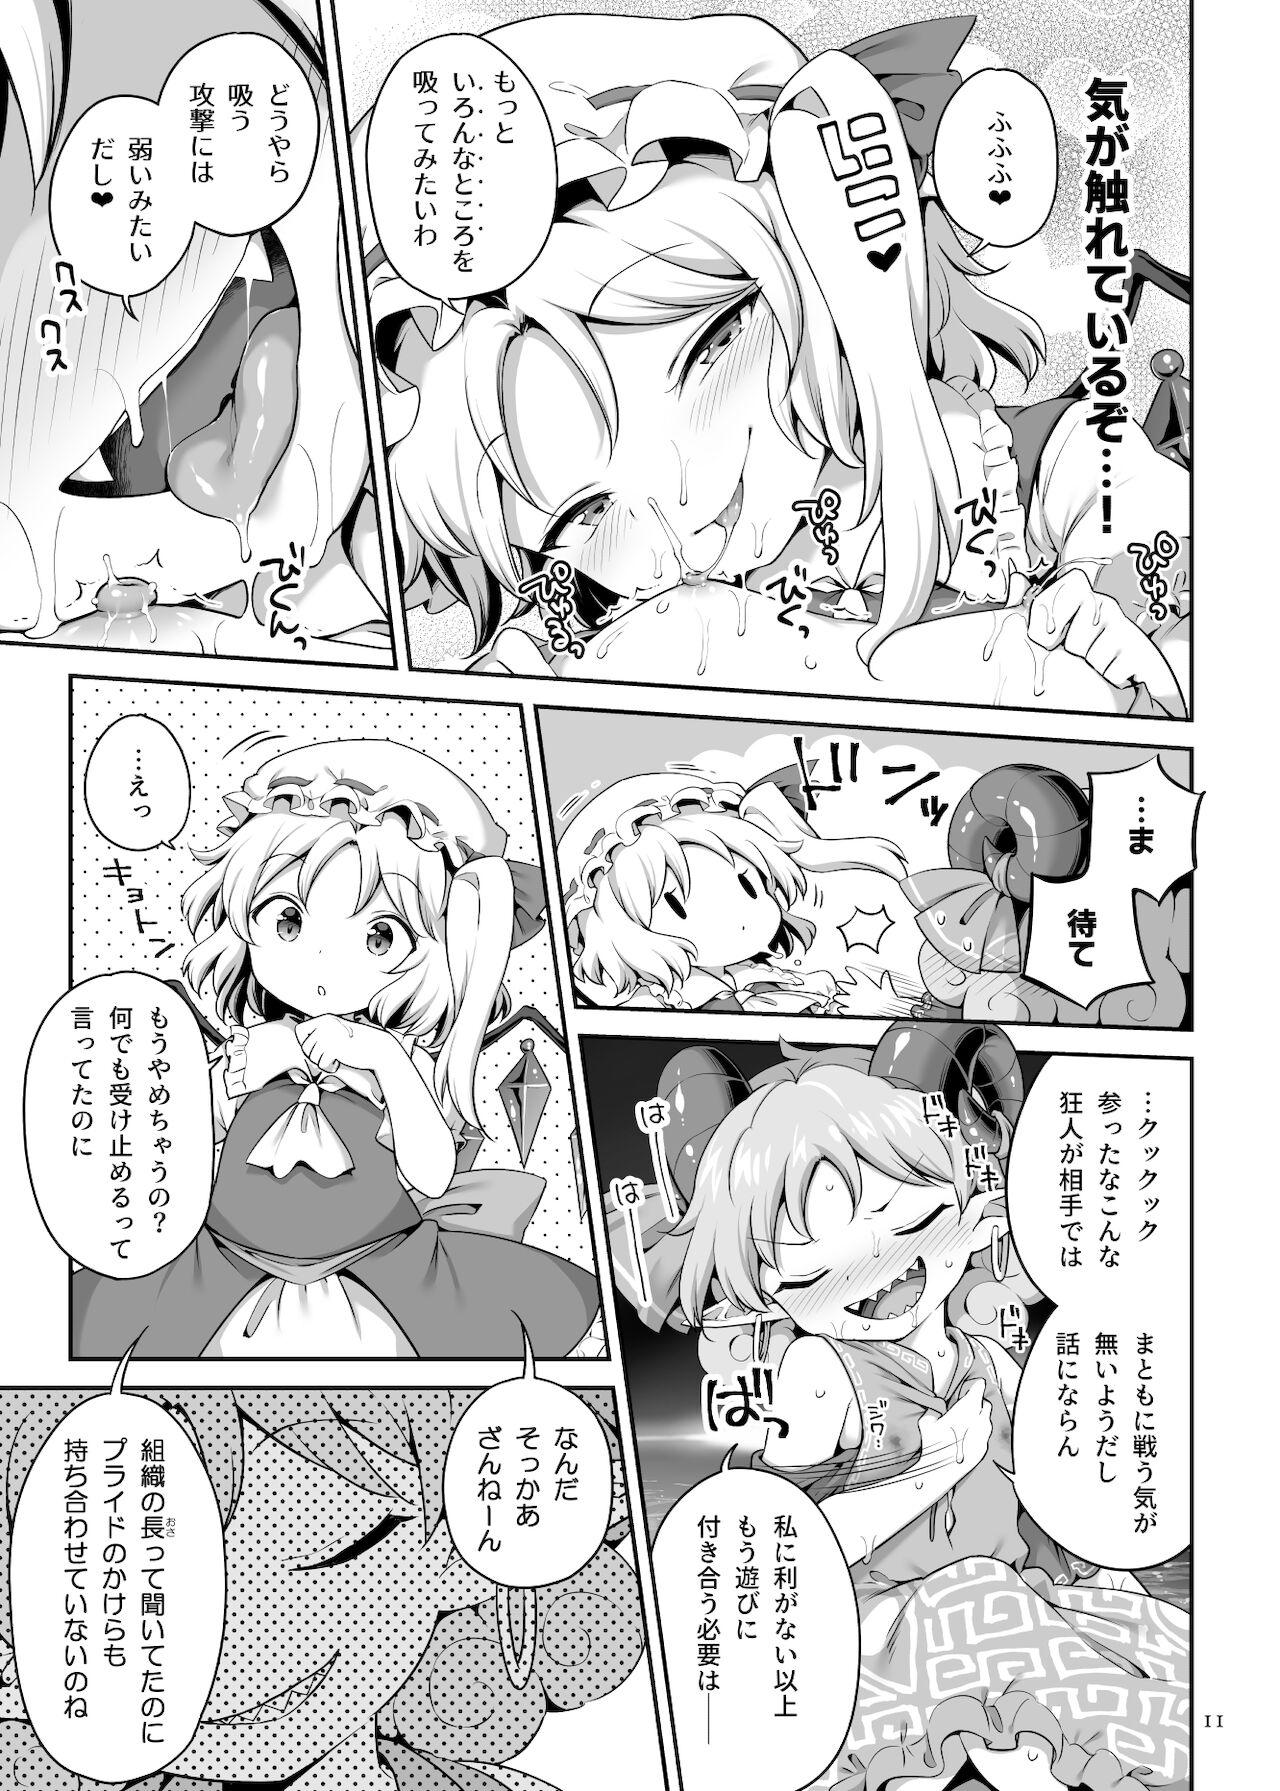 Oil 吸われて駄目なら吸ってみろ! - Touhou project Edging - Page 11